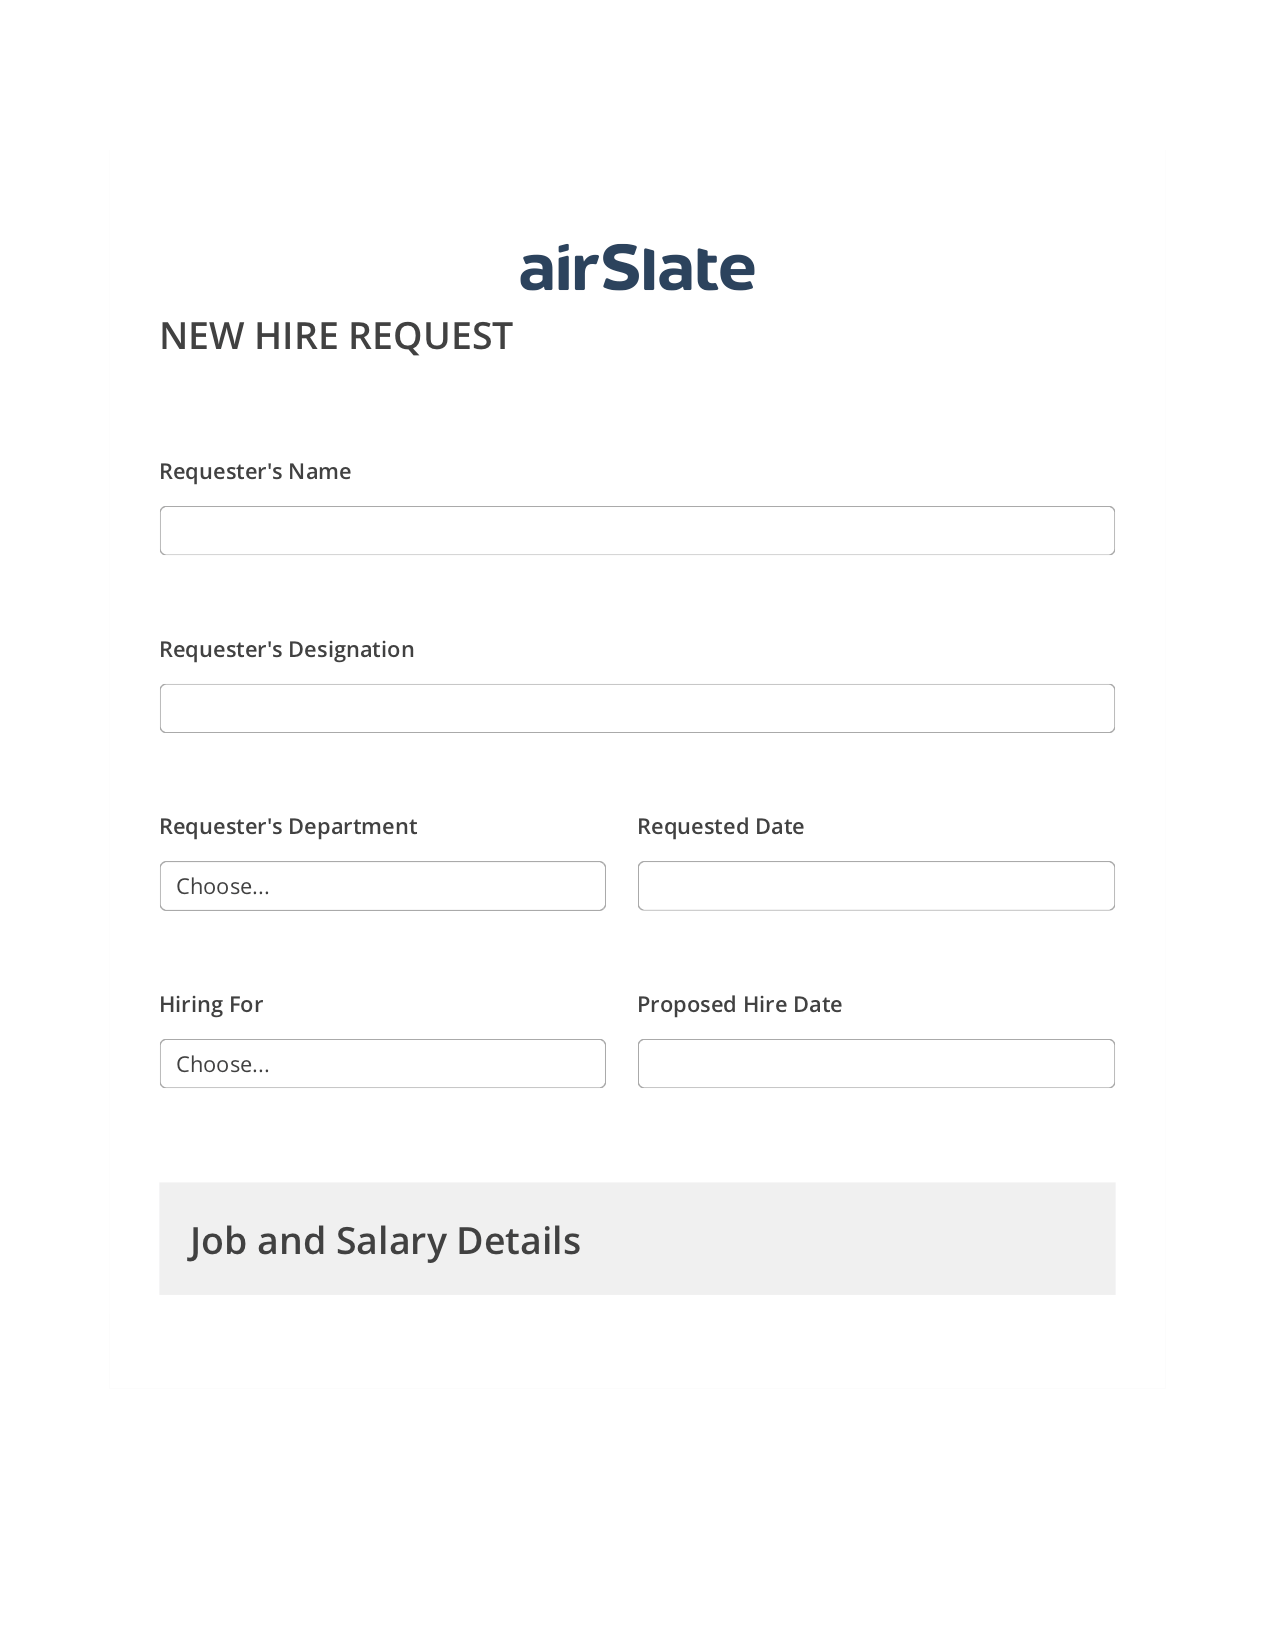 Multirole Hiring Request Workflow Pre-fill from Smartsheet Bot, Open under a Role Bot, Archive to OneDrive Bot